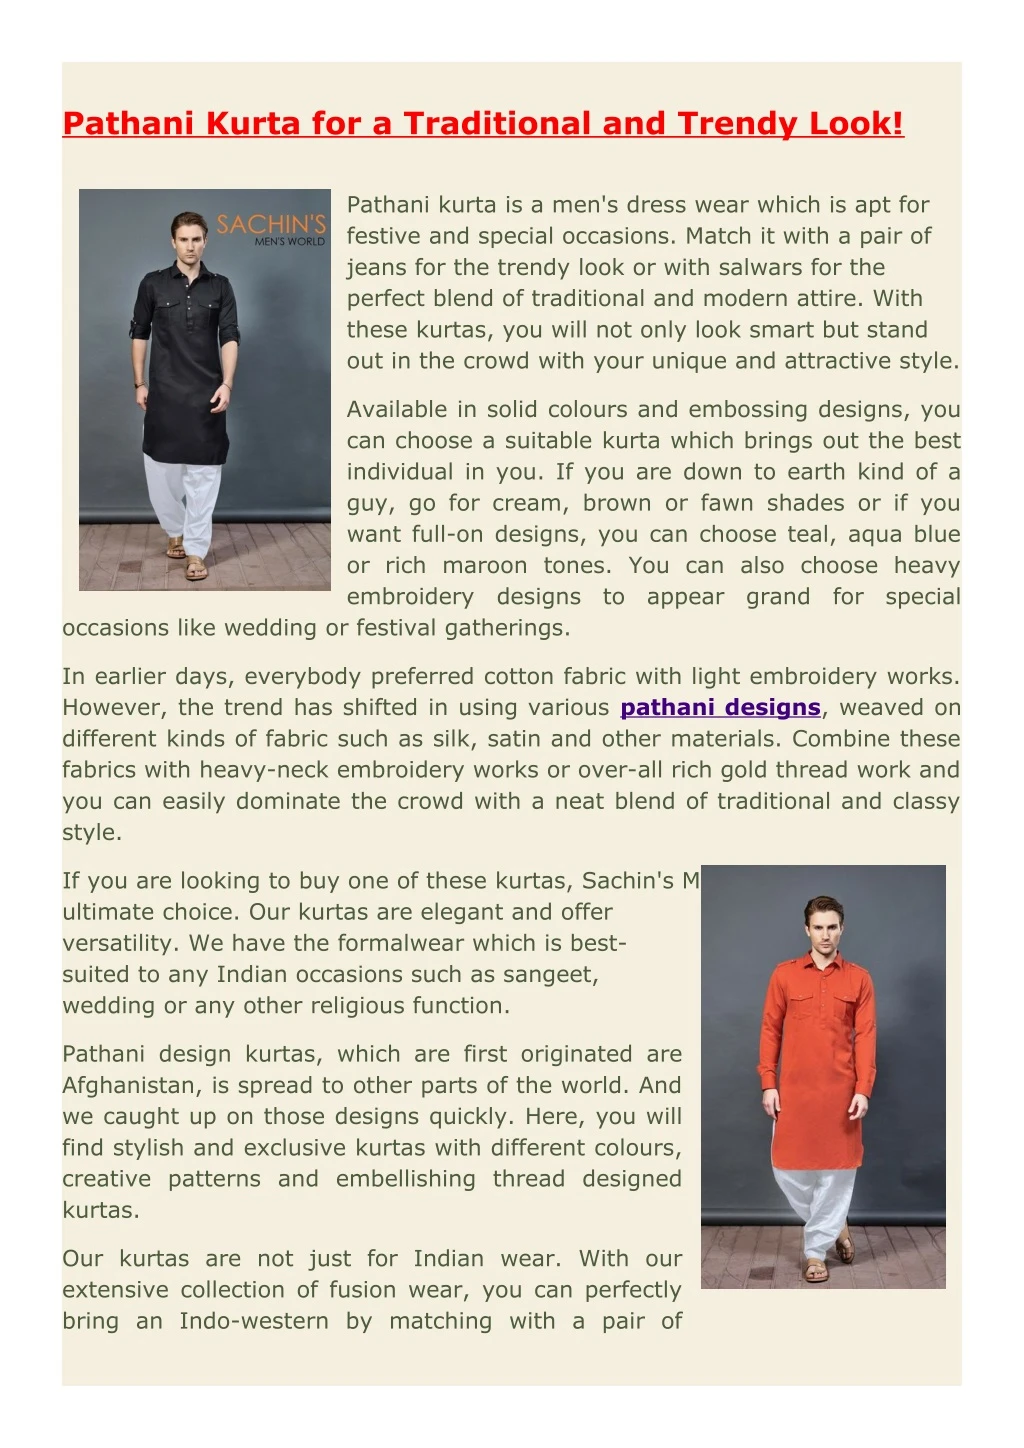 pathani kurta for a traditional and trendy look